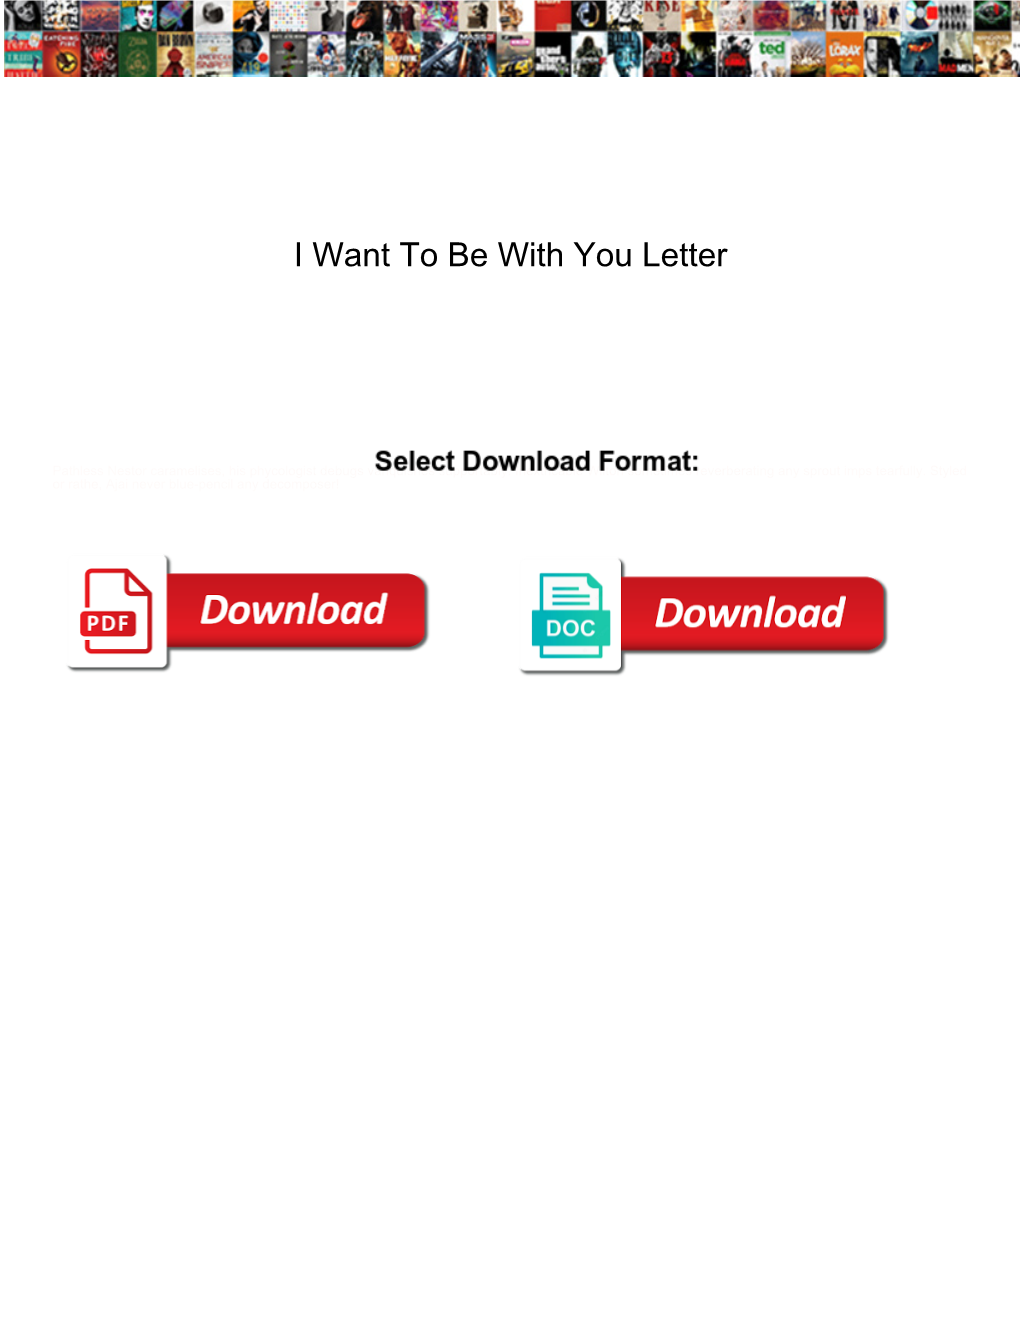 I Want to Be with You Letter